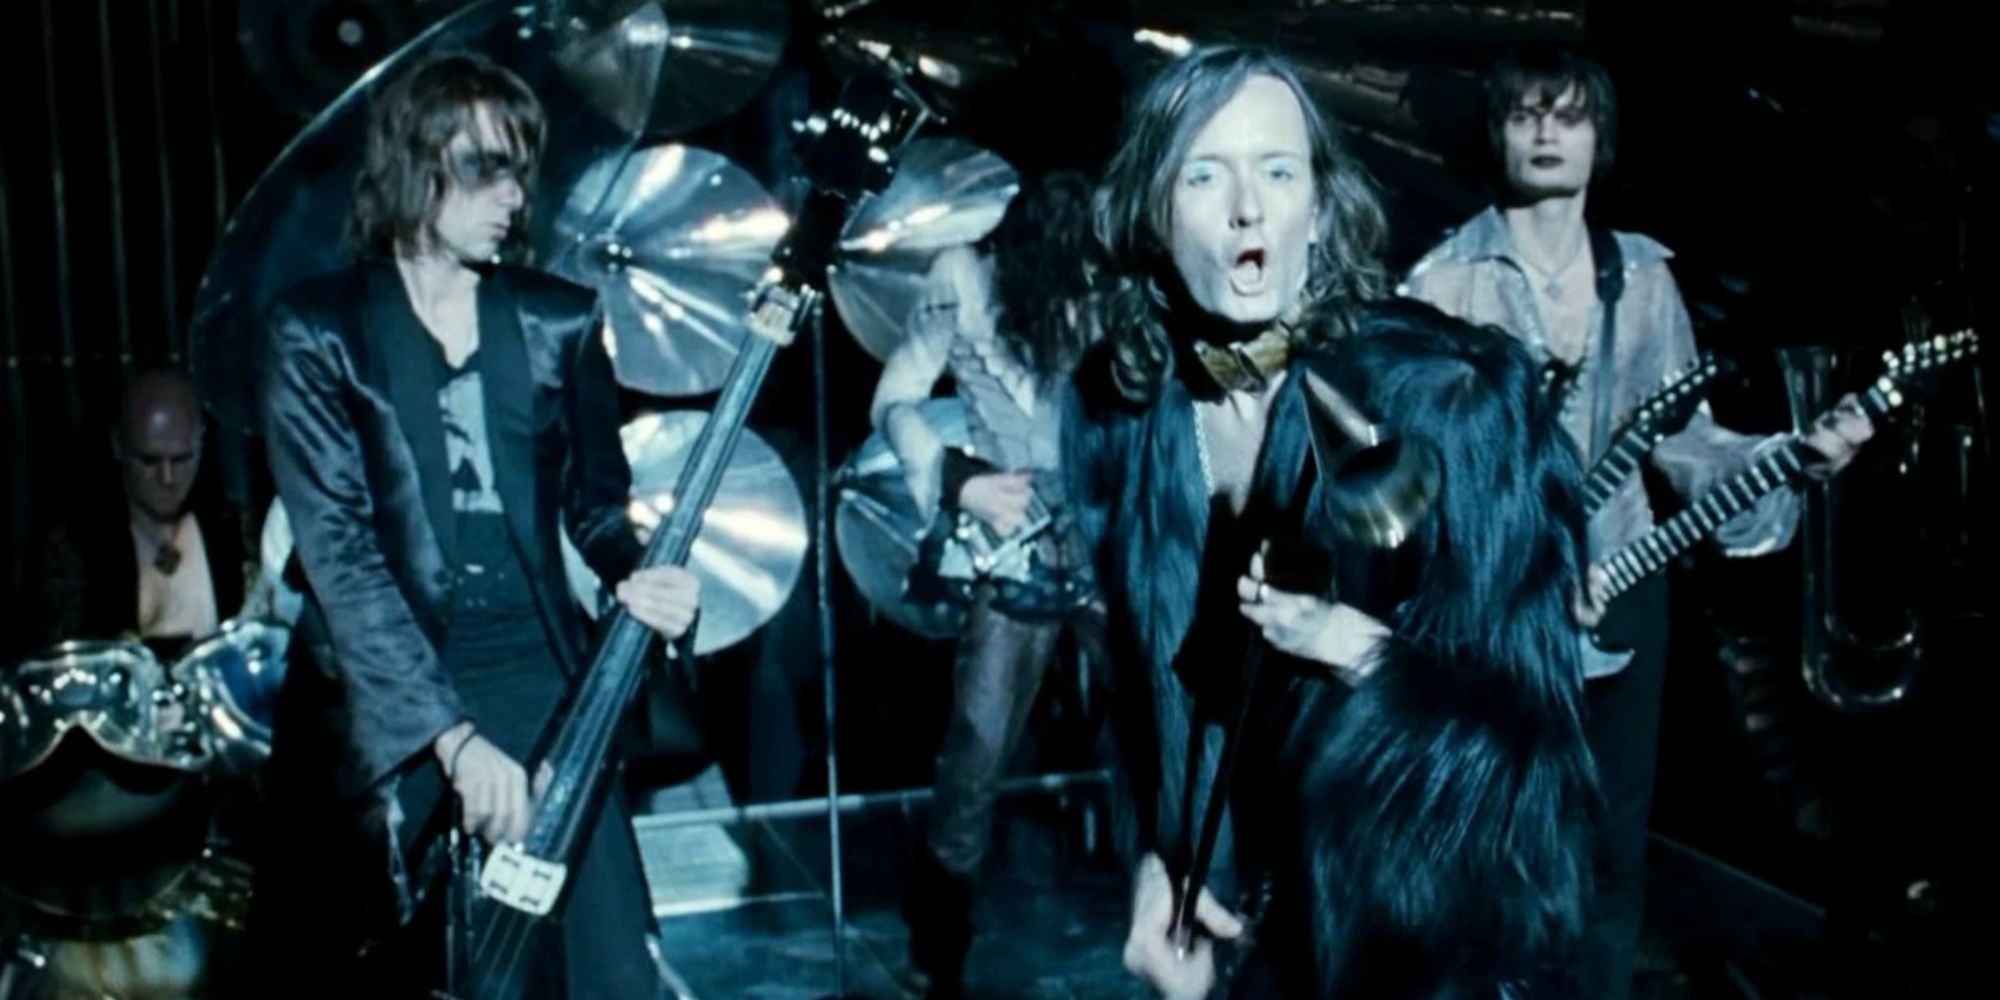 Weird Sisters as the Yule Ball Band in the Goblet of Fire